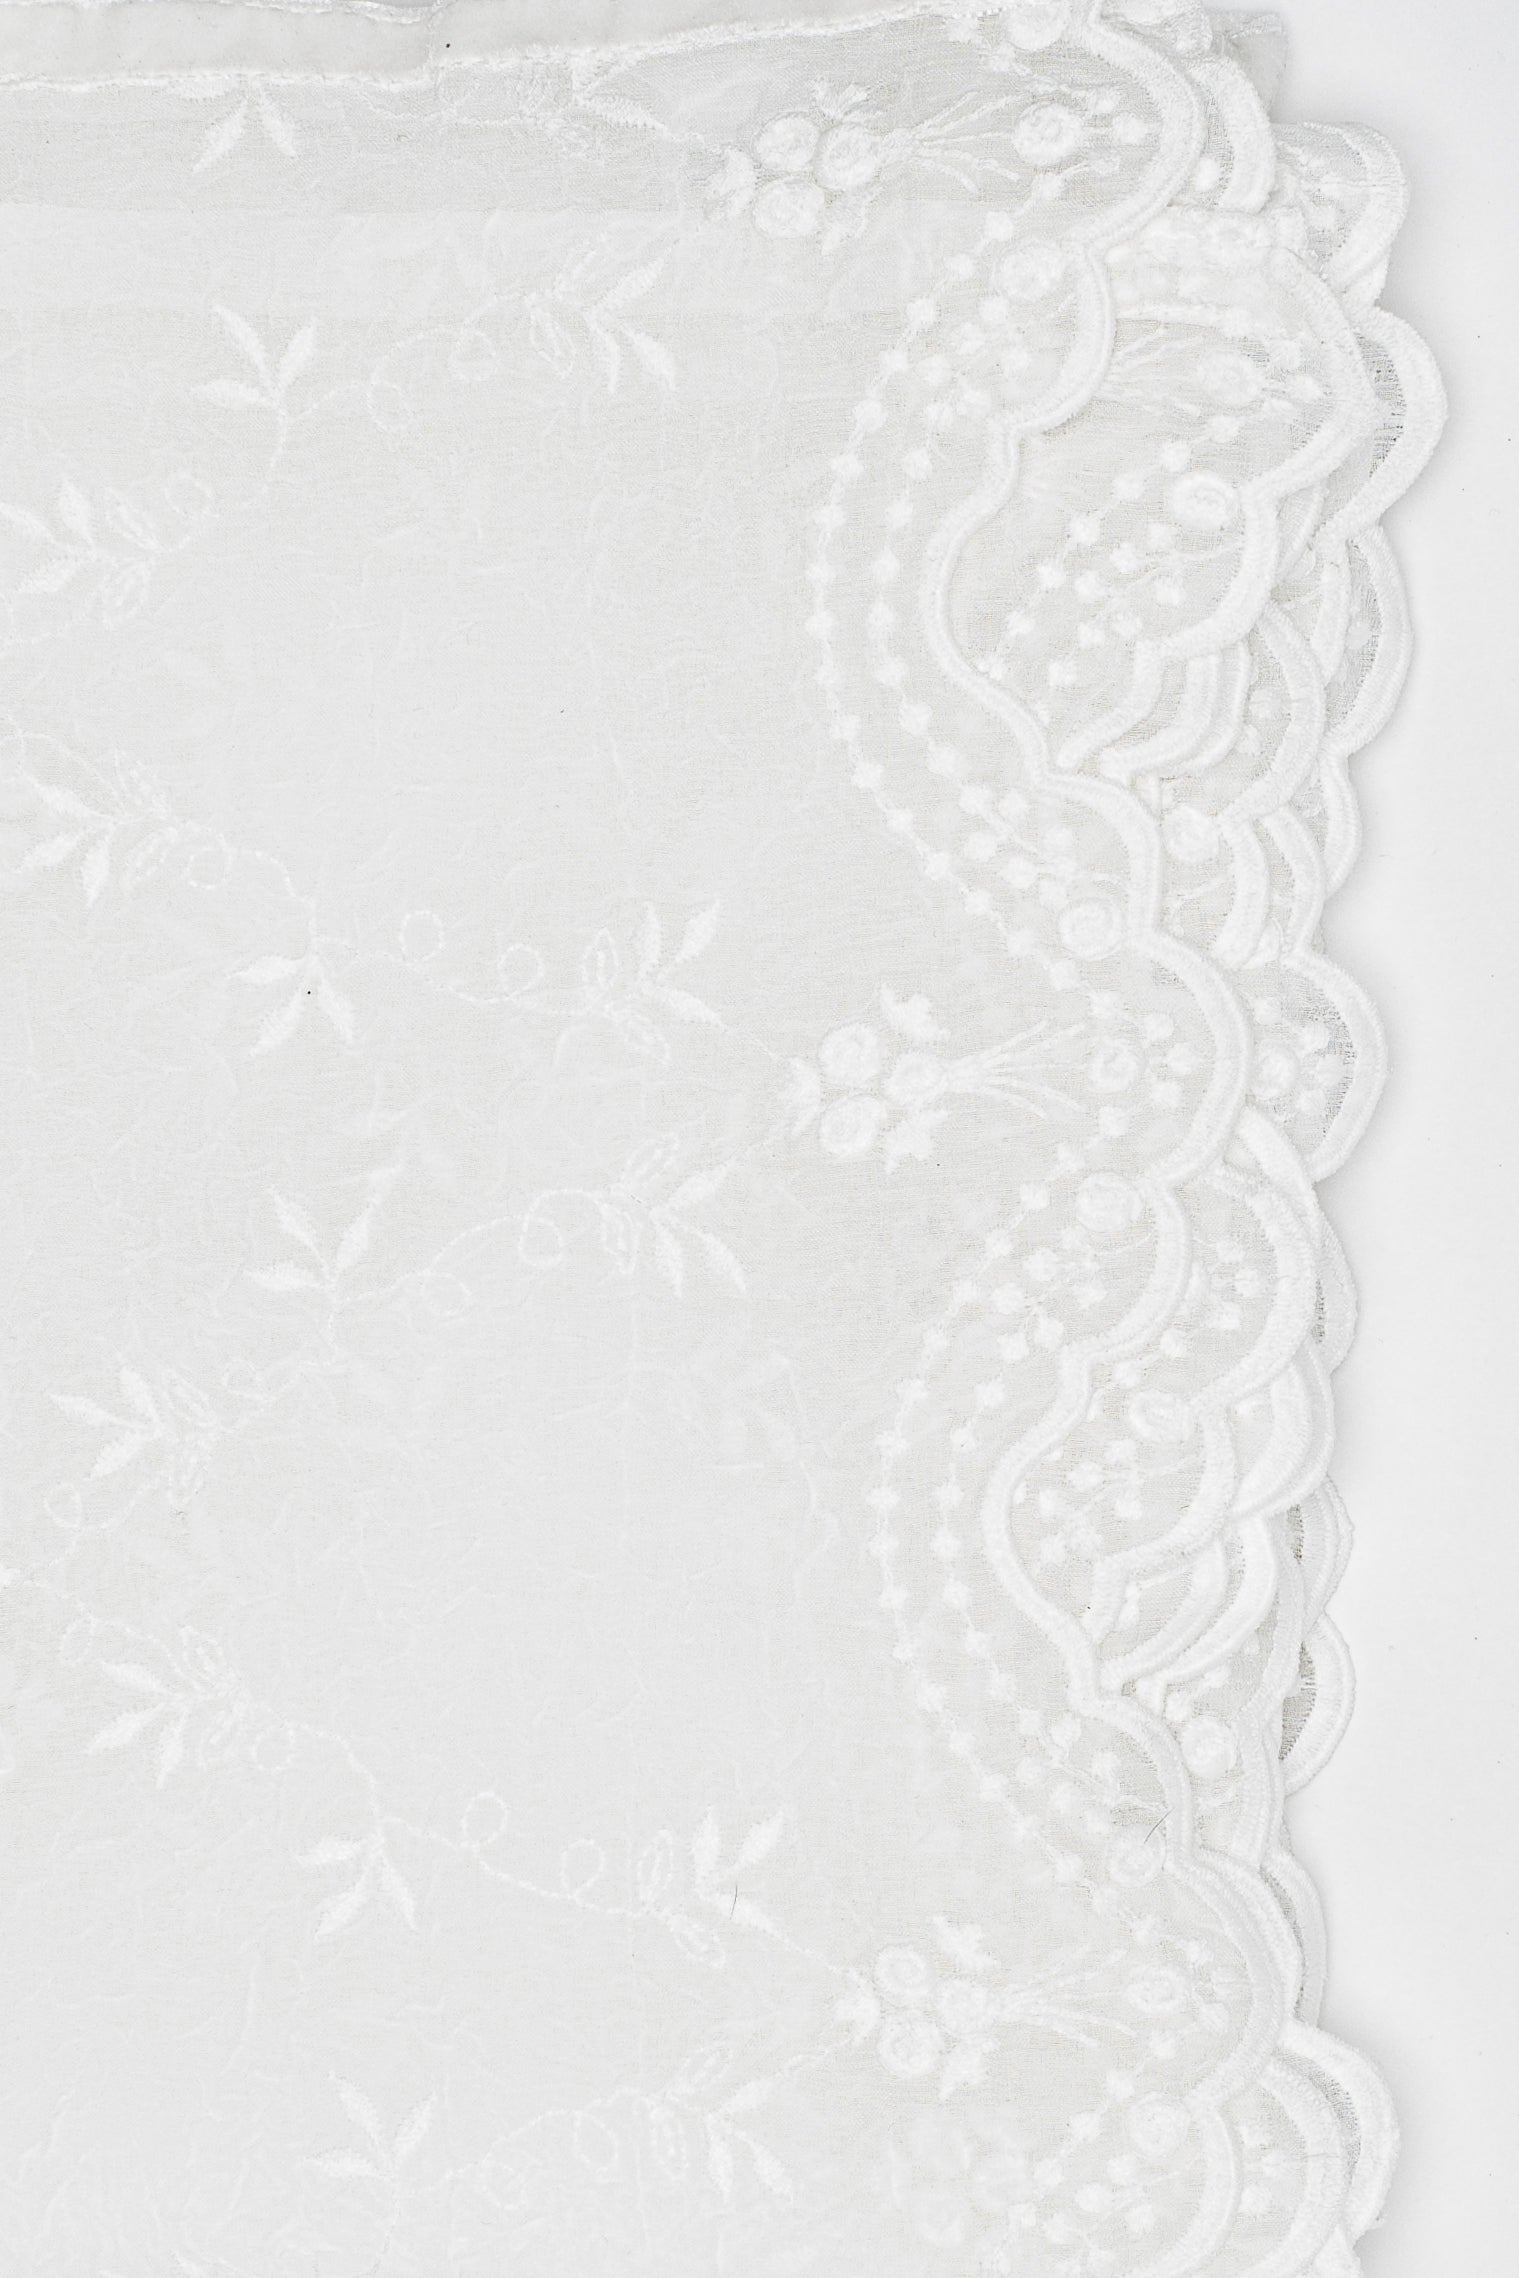 This elegant embroidered voile table runner is a perfect fit for any style setting from boho, design to romantic...your table will look fabulous. Dressing your table is a pleasure!